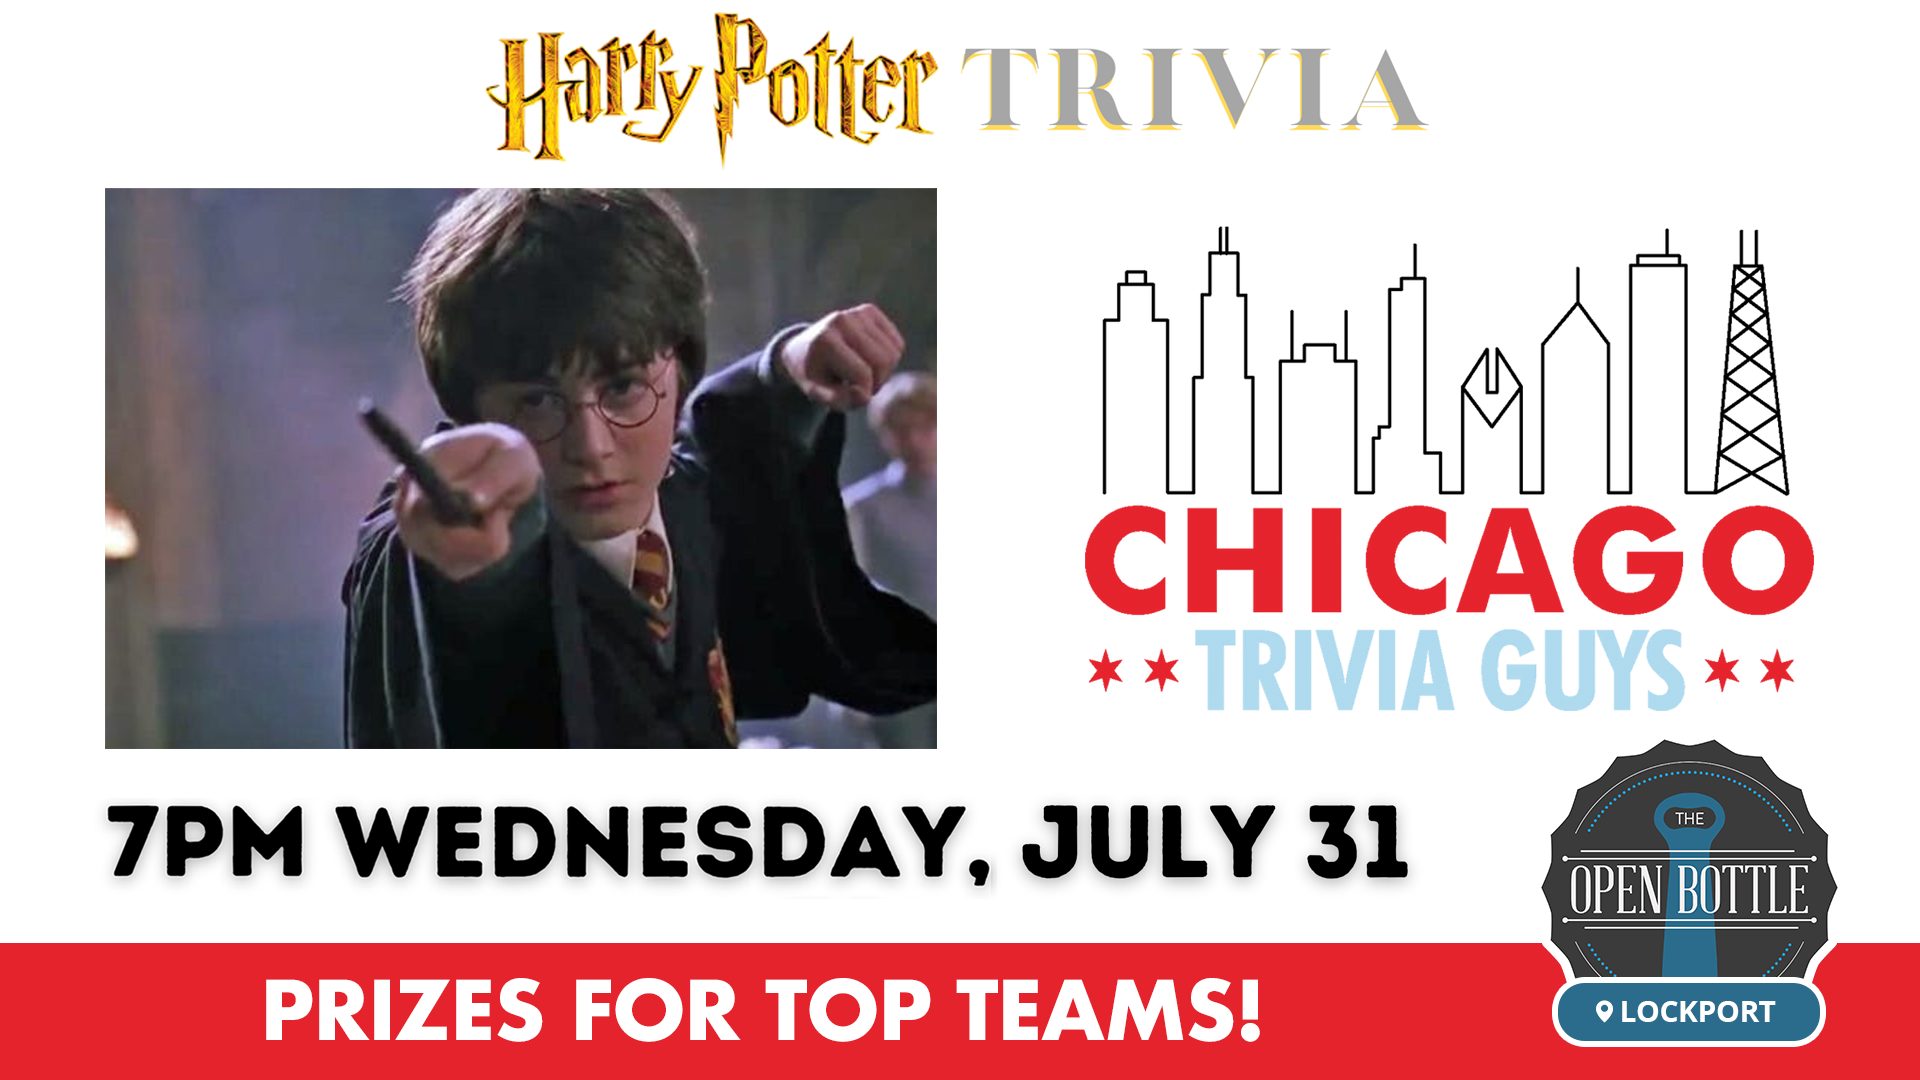 Event: Harry Potter Trivia with Chicago Trivia Guys